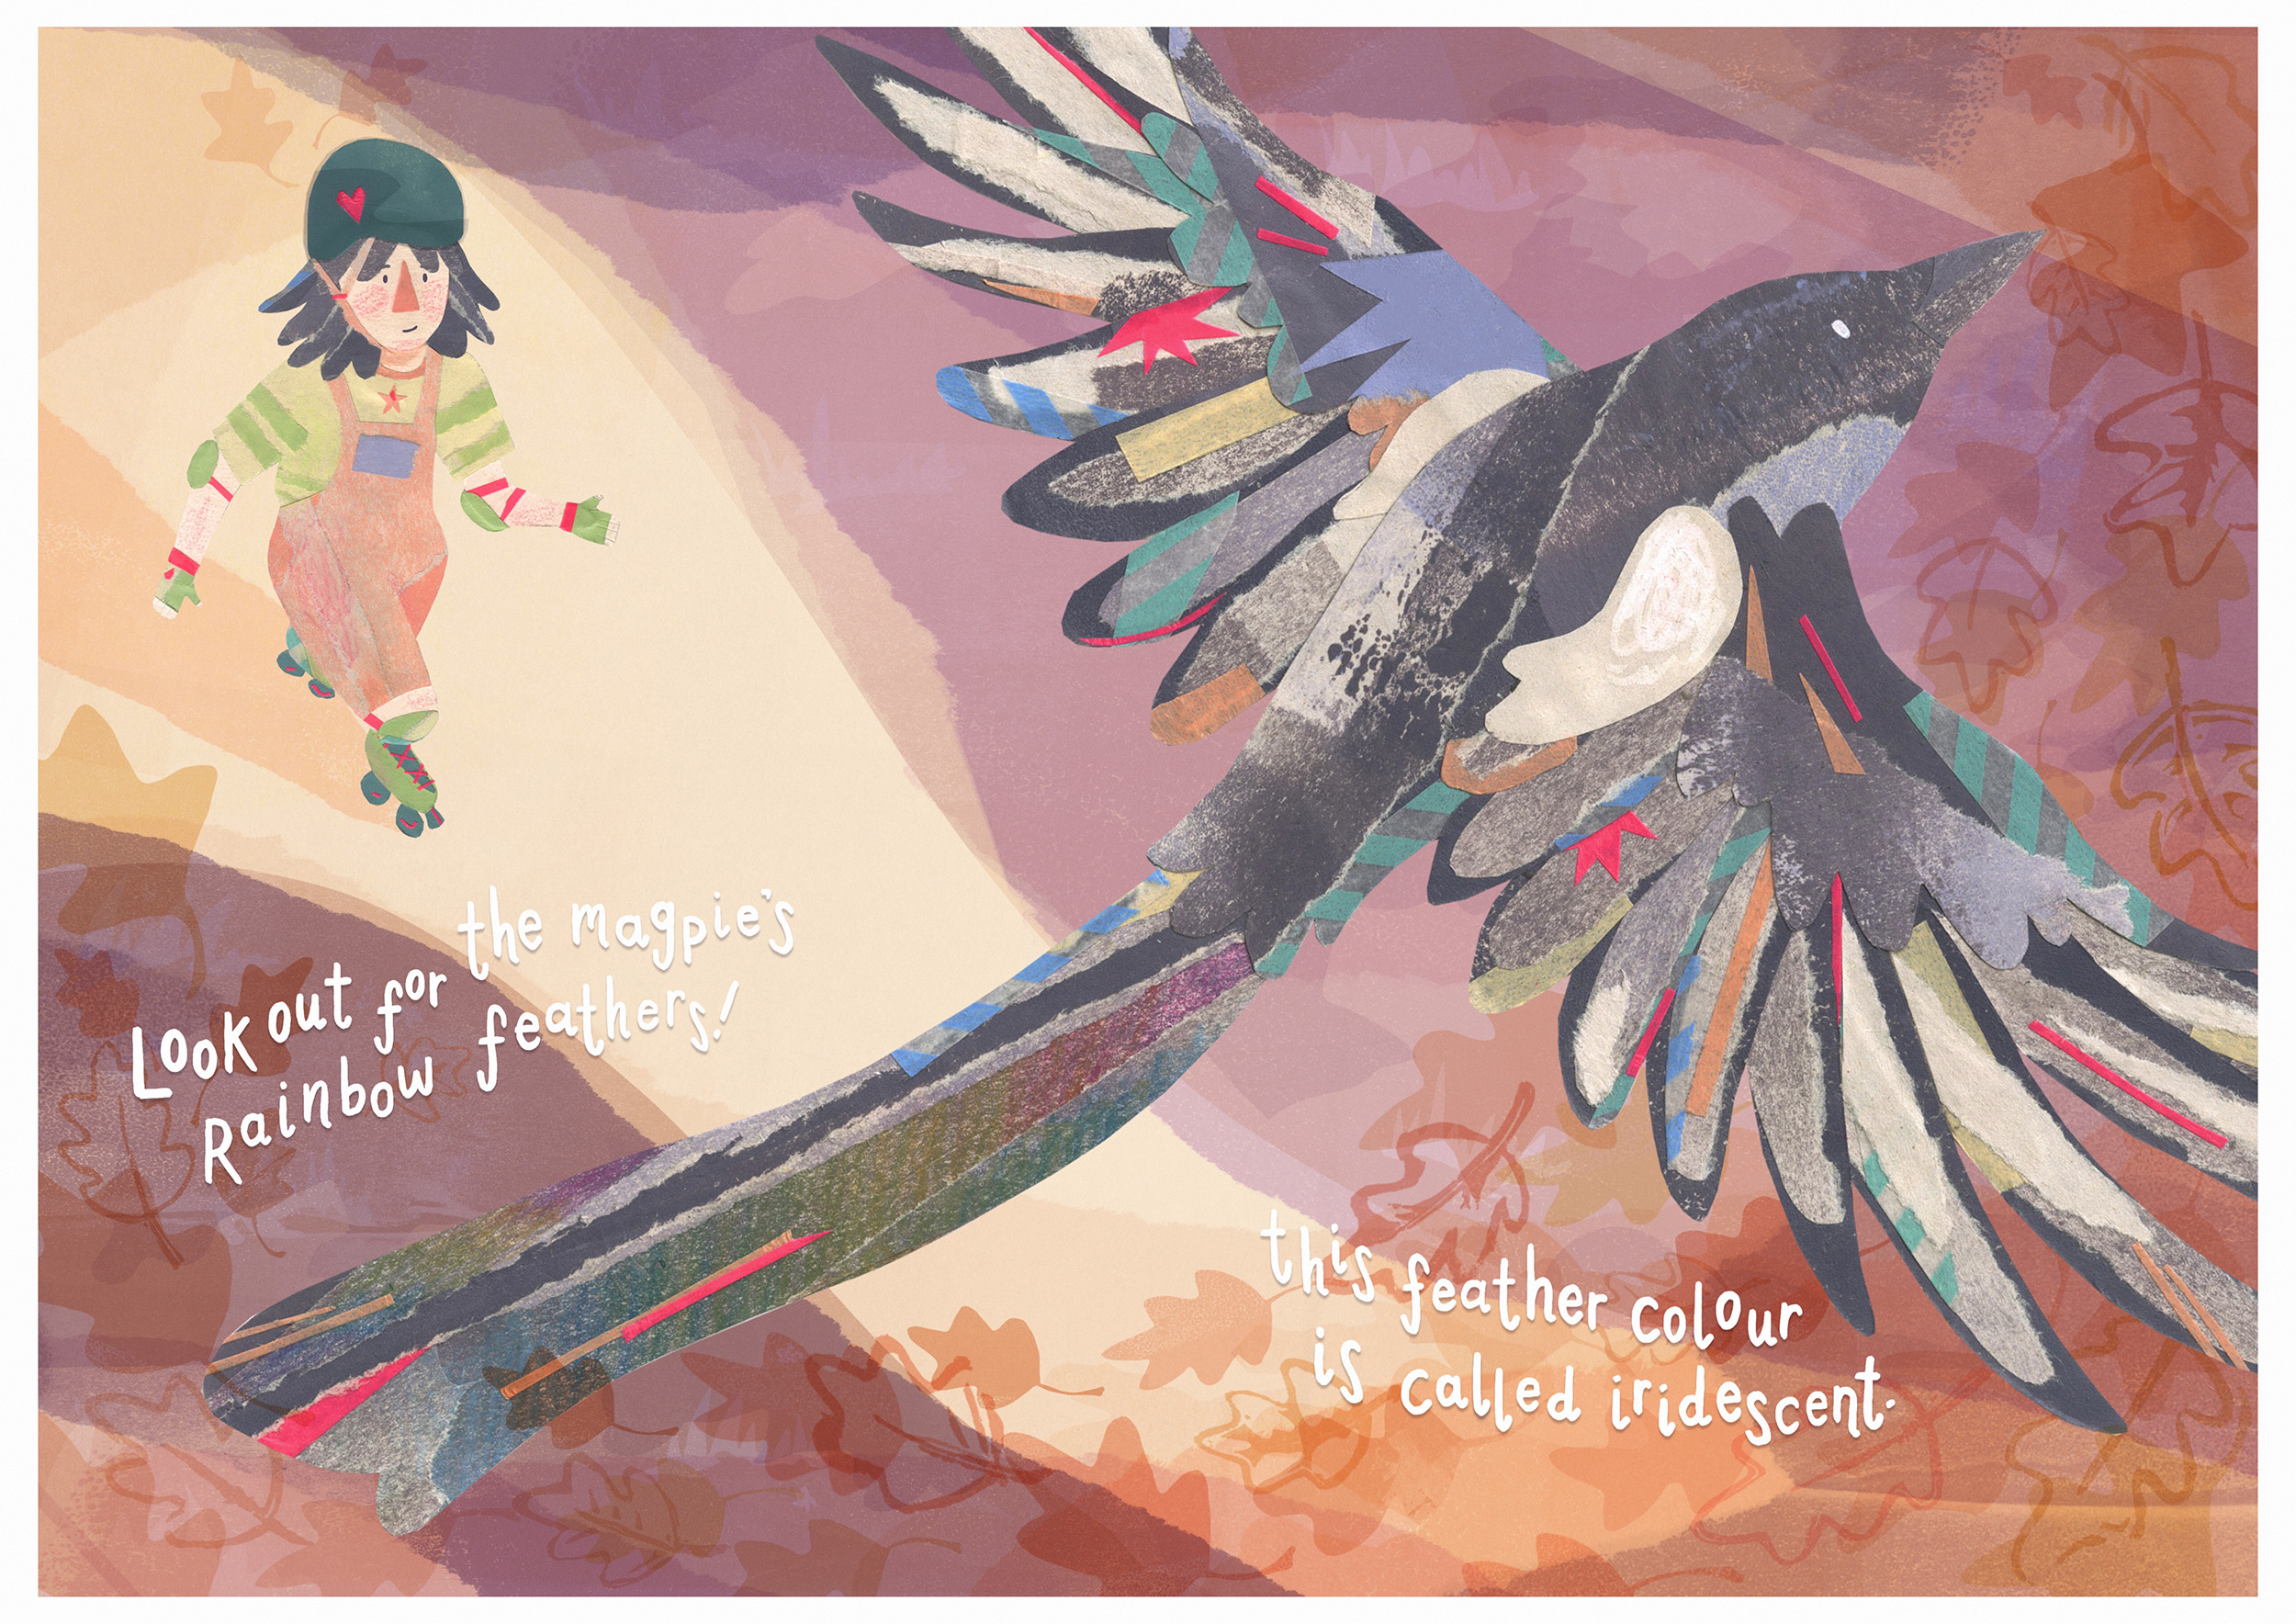 A young girl approaching a magpie in flight. The image is made from collage, with text that reads: "Look out for the magpie's rainbow feathers! This feather colour is called iridescent."